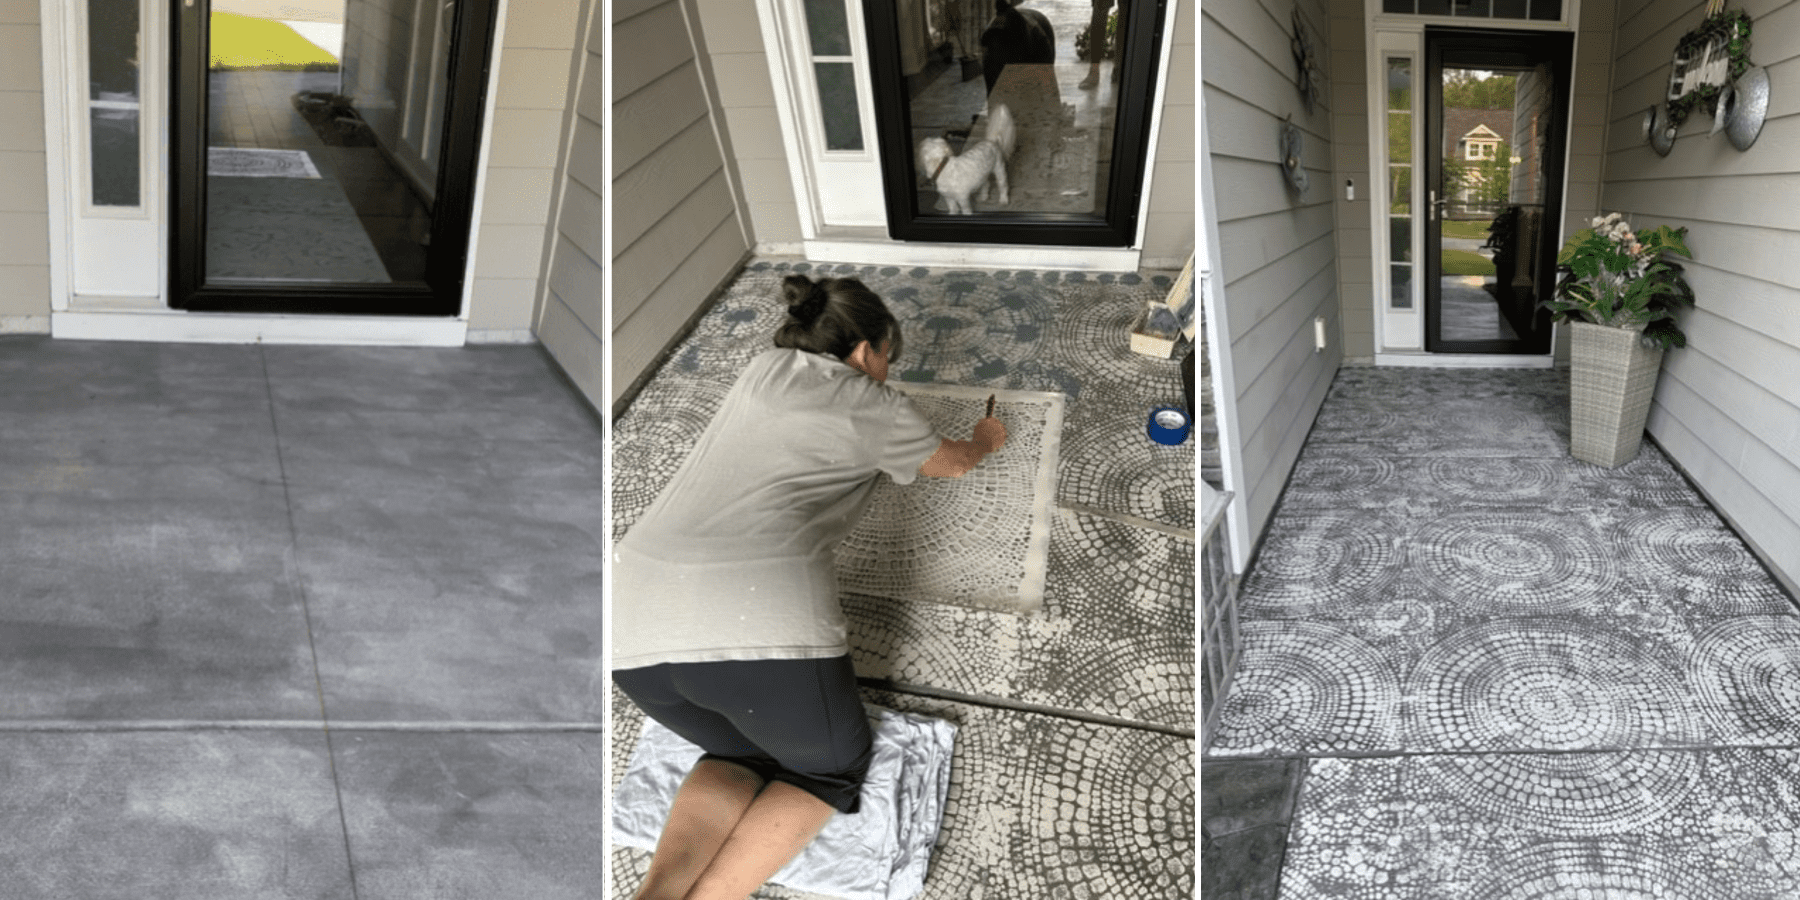 A three-stage transformation of a front porch: starting with plain concrete, progressing through the stenciling process with a woman applying designs, and ending with a fully stenciled surface featuring intricate patterns